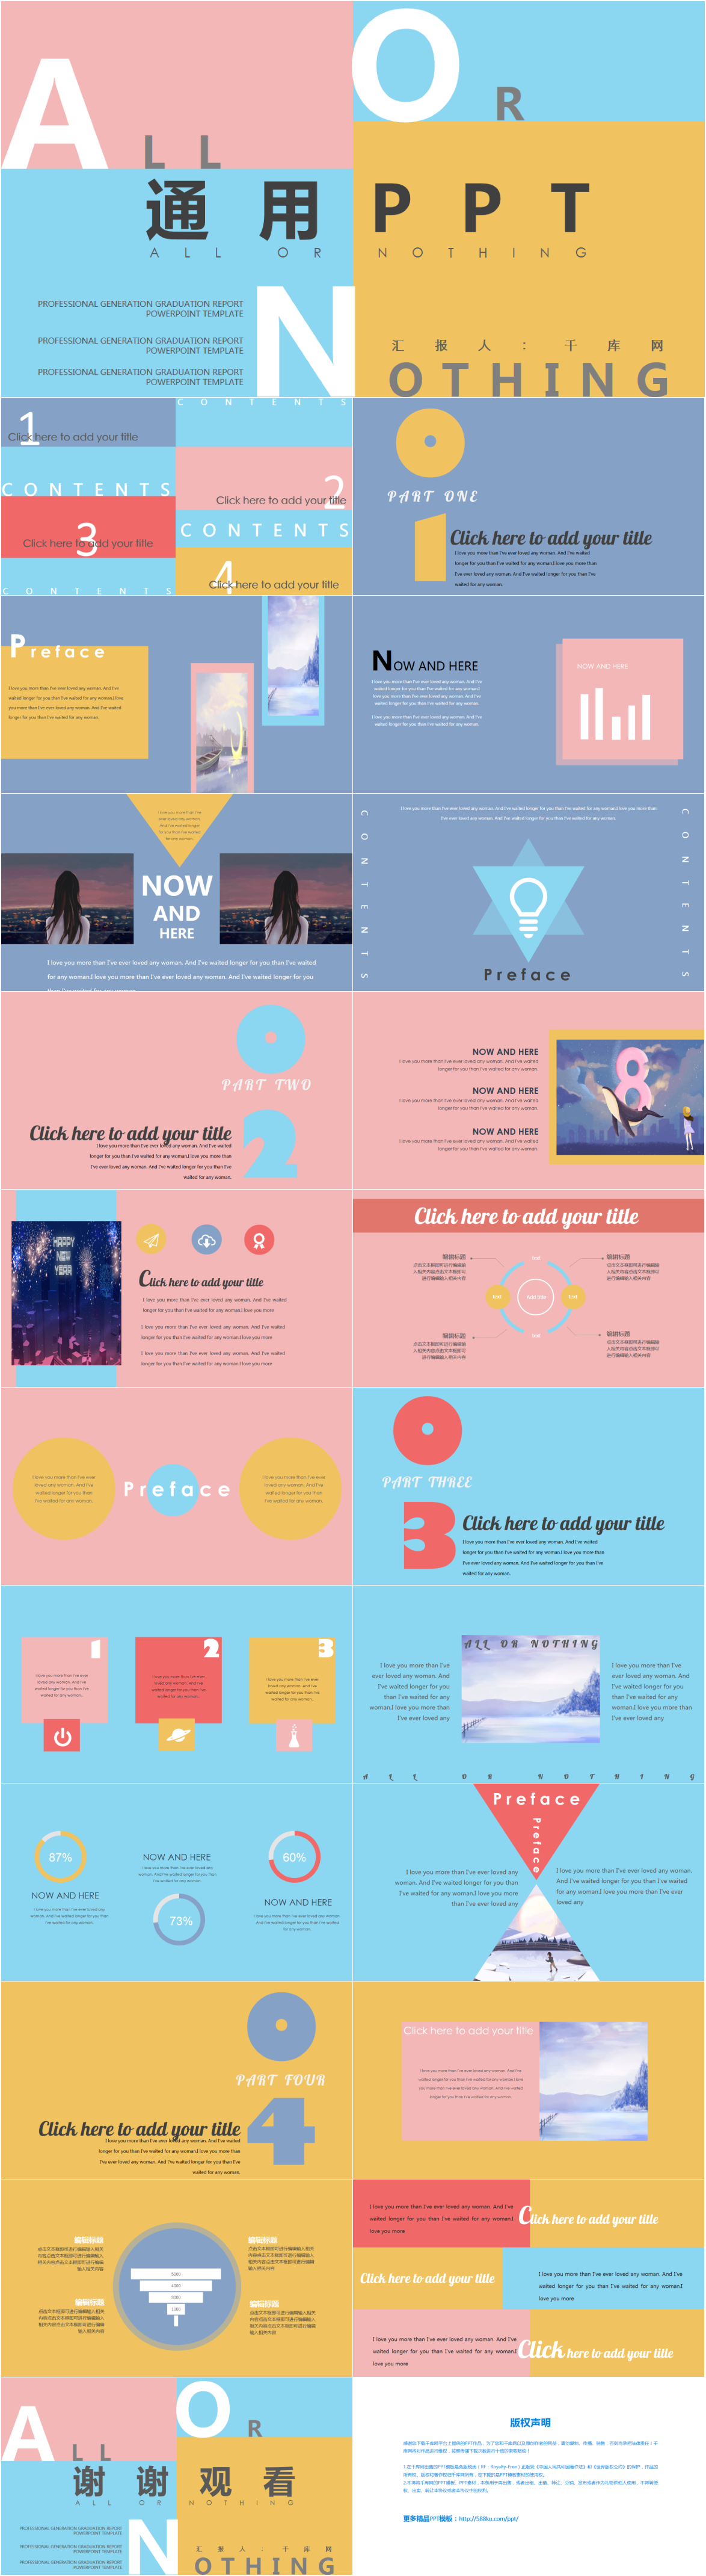 download-creative-ppt-templates-for-presentations-the-creative